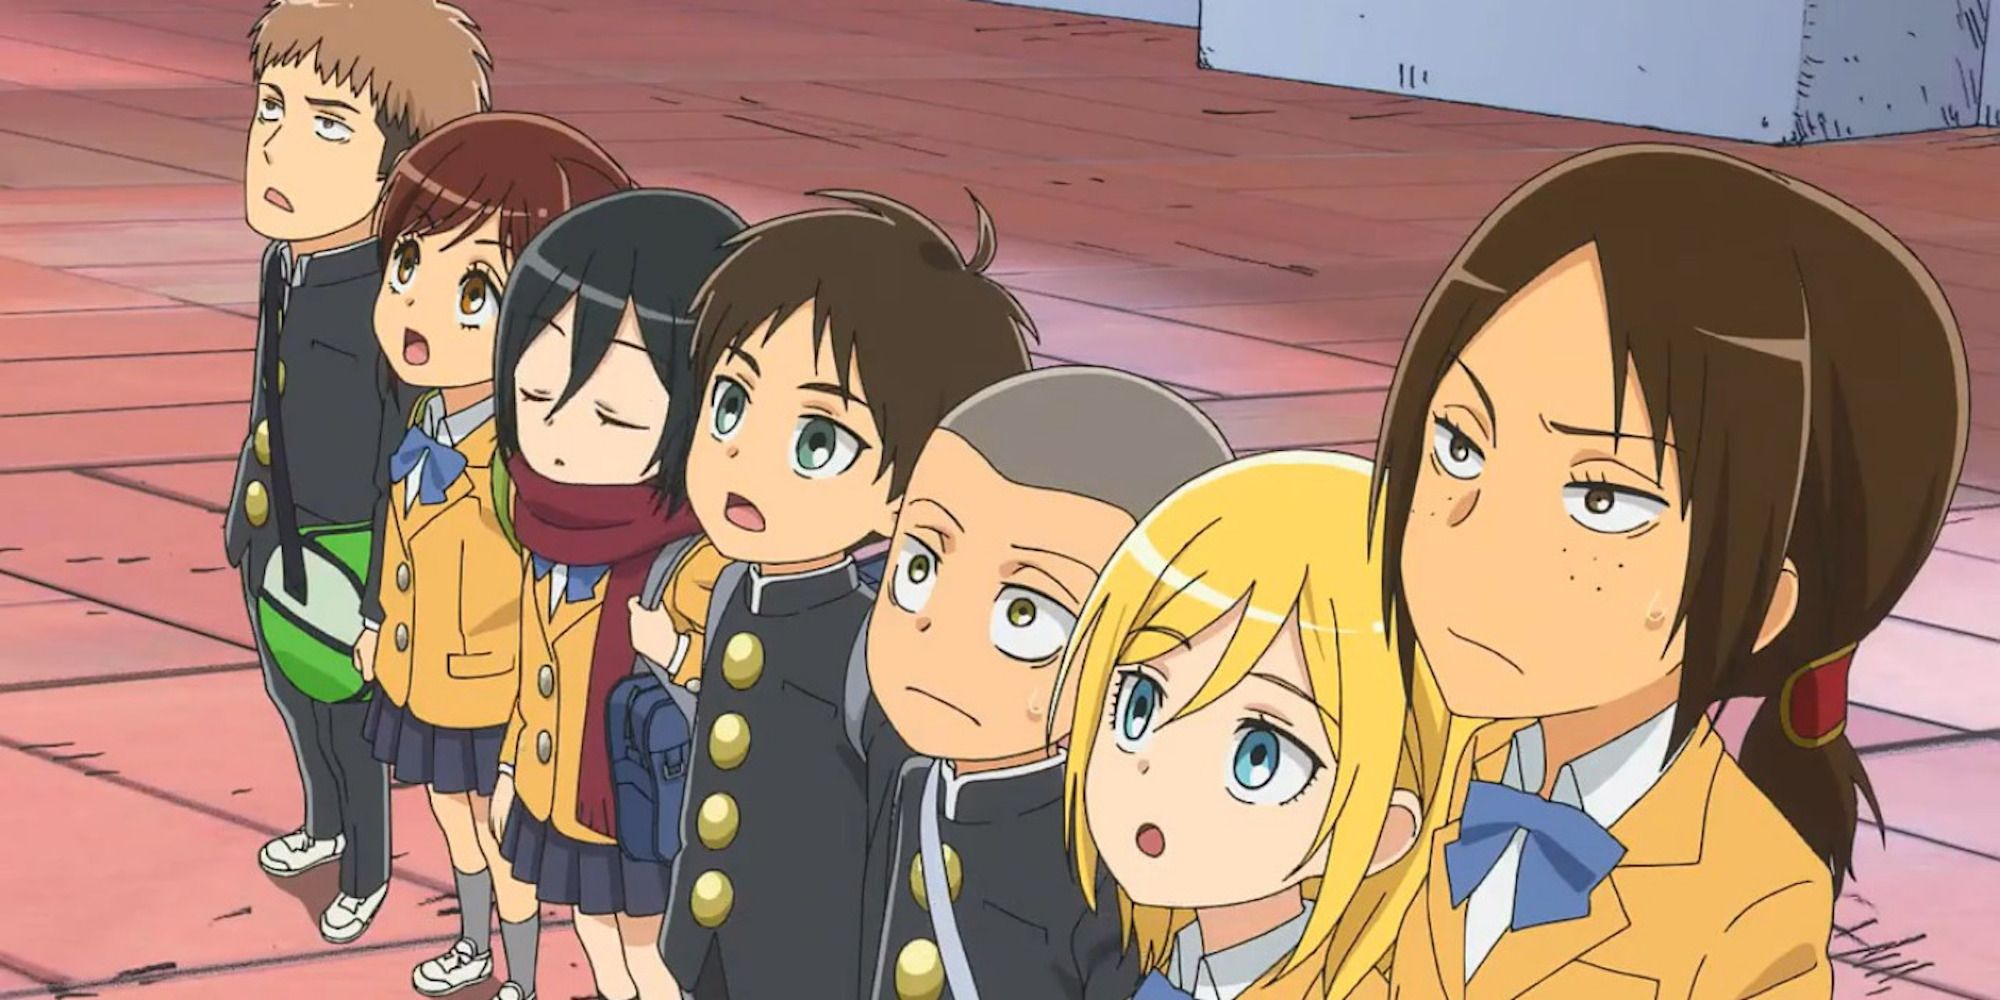 A scene featuring characters from Attack On Titan: Junior High